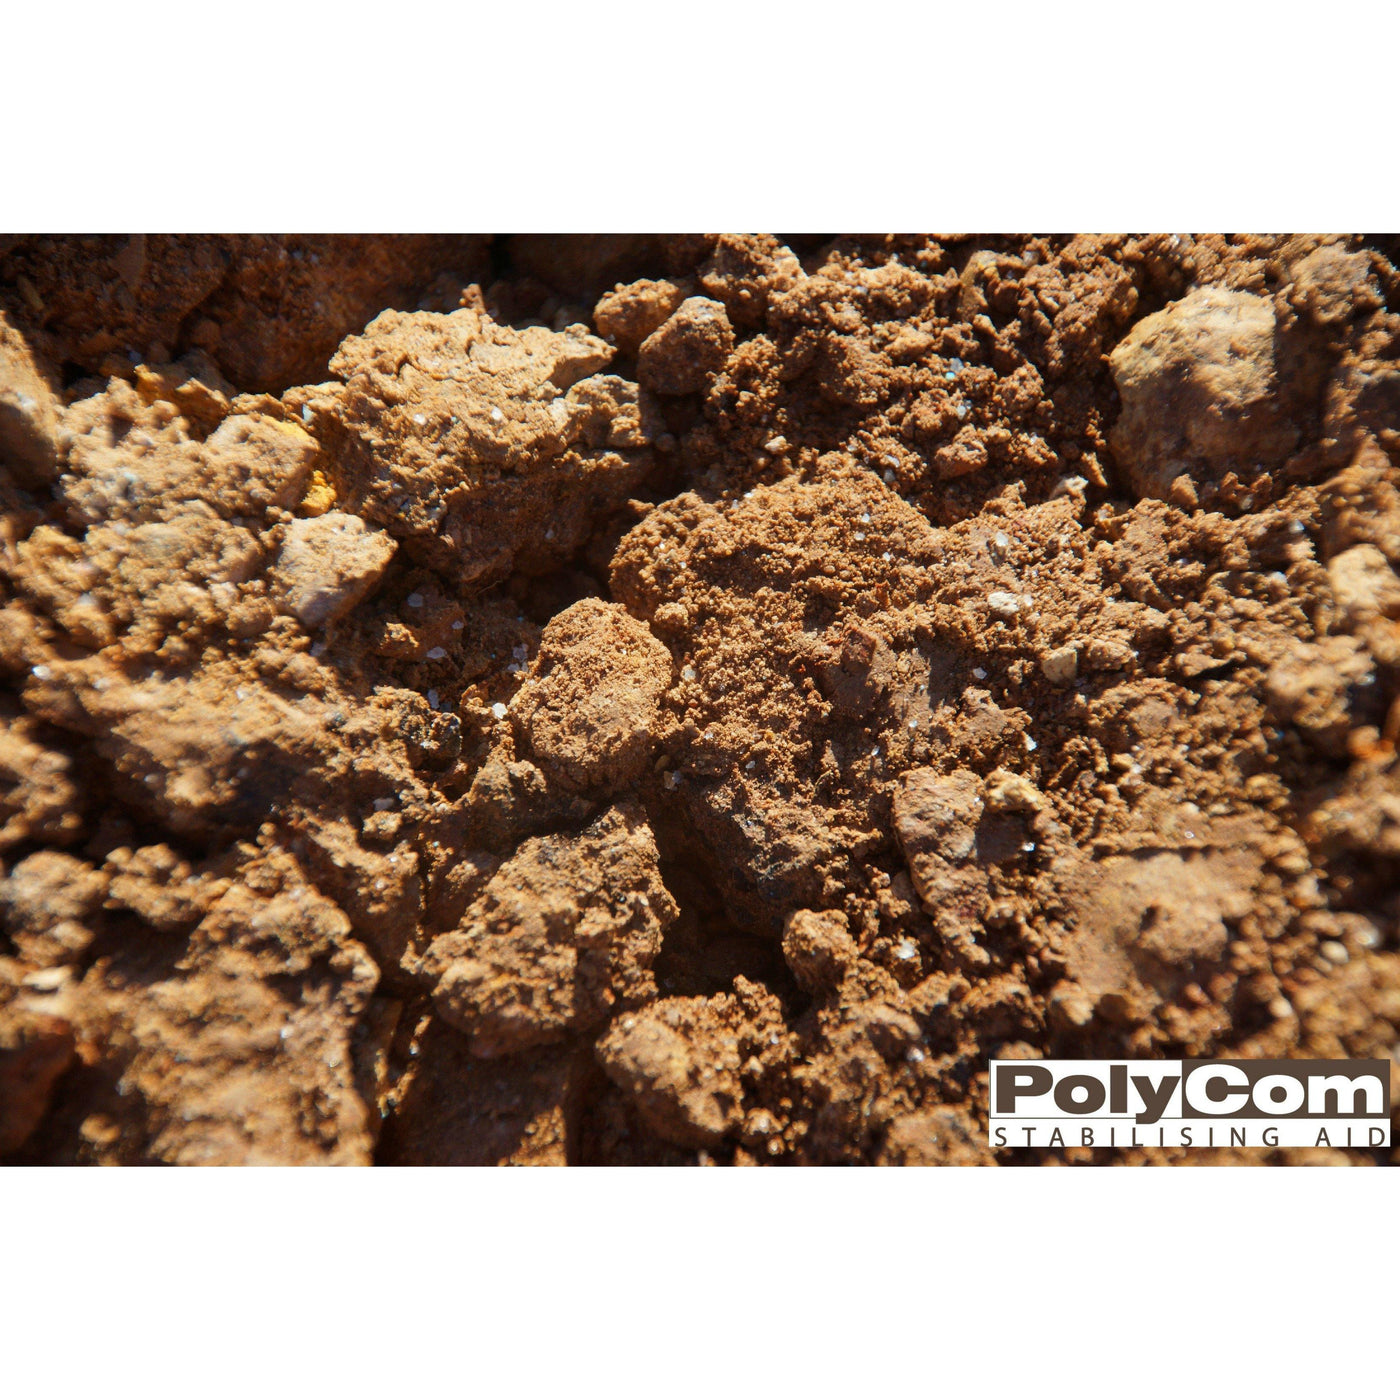 PolyCom Stabilising Aid | Soil Stabilisation | Dust Suppression | Non Toxic - Earthco Projects Store